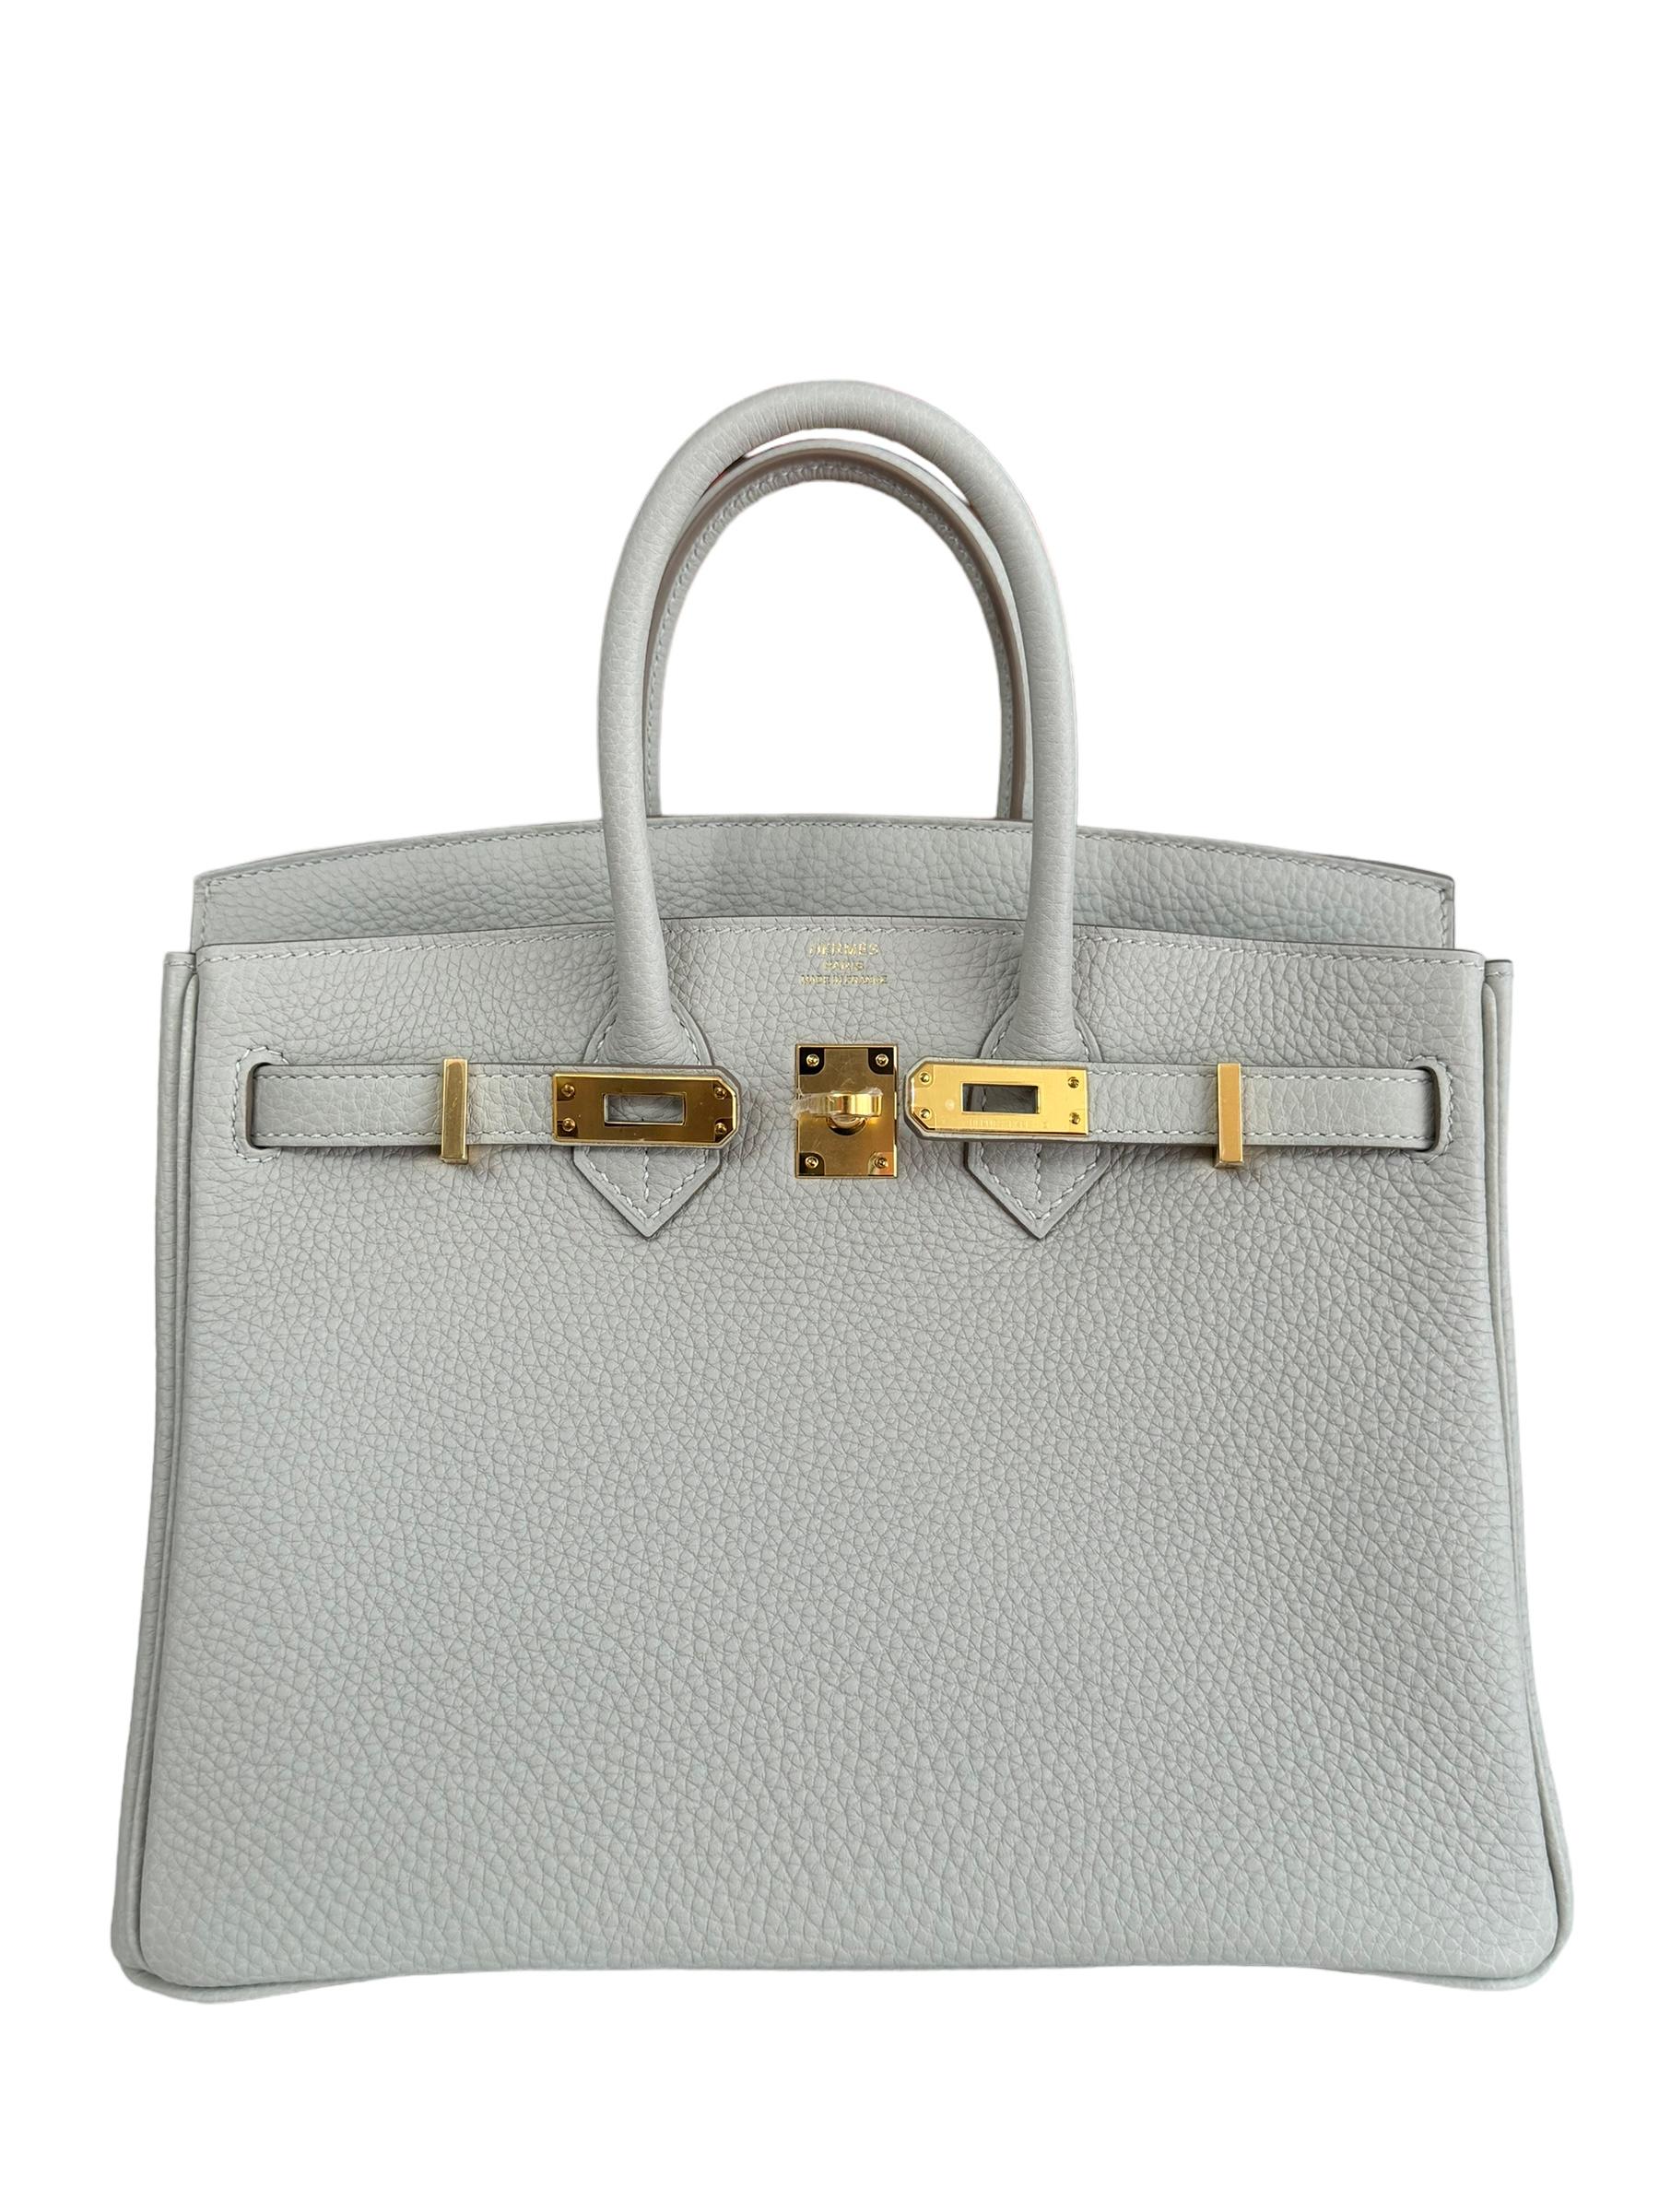 Absolutely Stunning and One The Most Coveted and Difficult to get Hermes Combos! New 2022 Hermes Birkin 25 Gris Perle Togo Leather complimented by Gold Hardware. U Stamp 2022. Includes all accessories and Box.

Shop with Confidence from Lux Addicts.